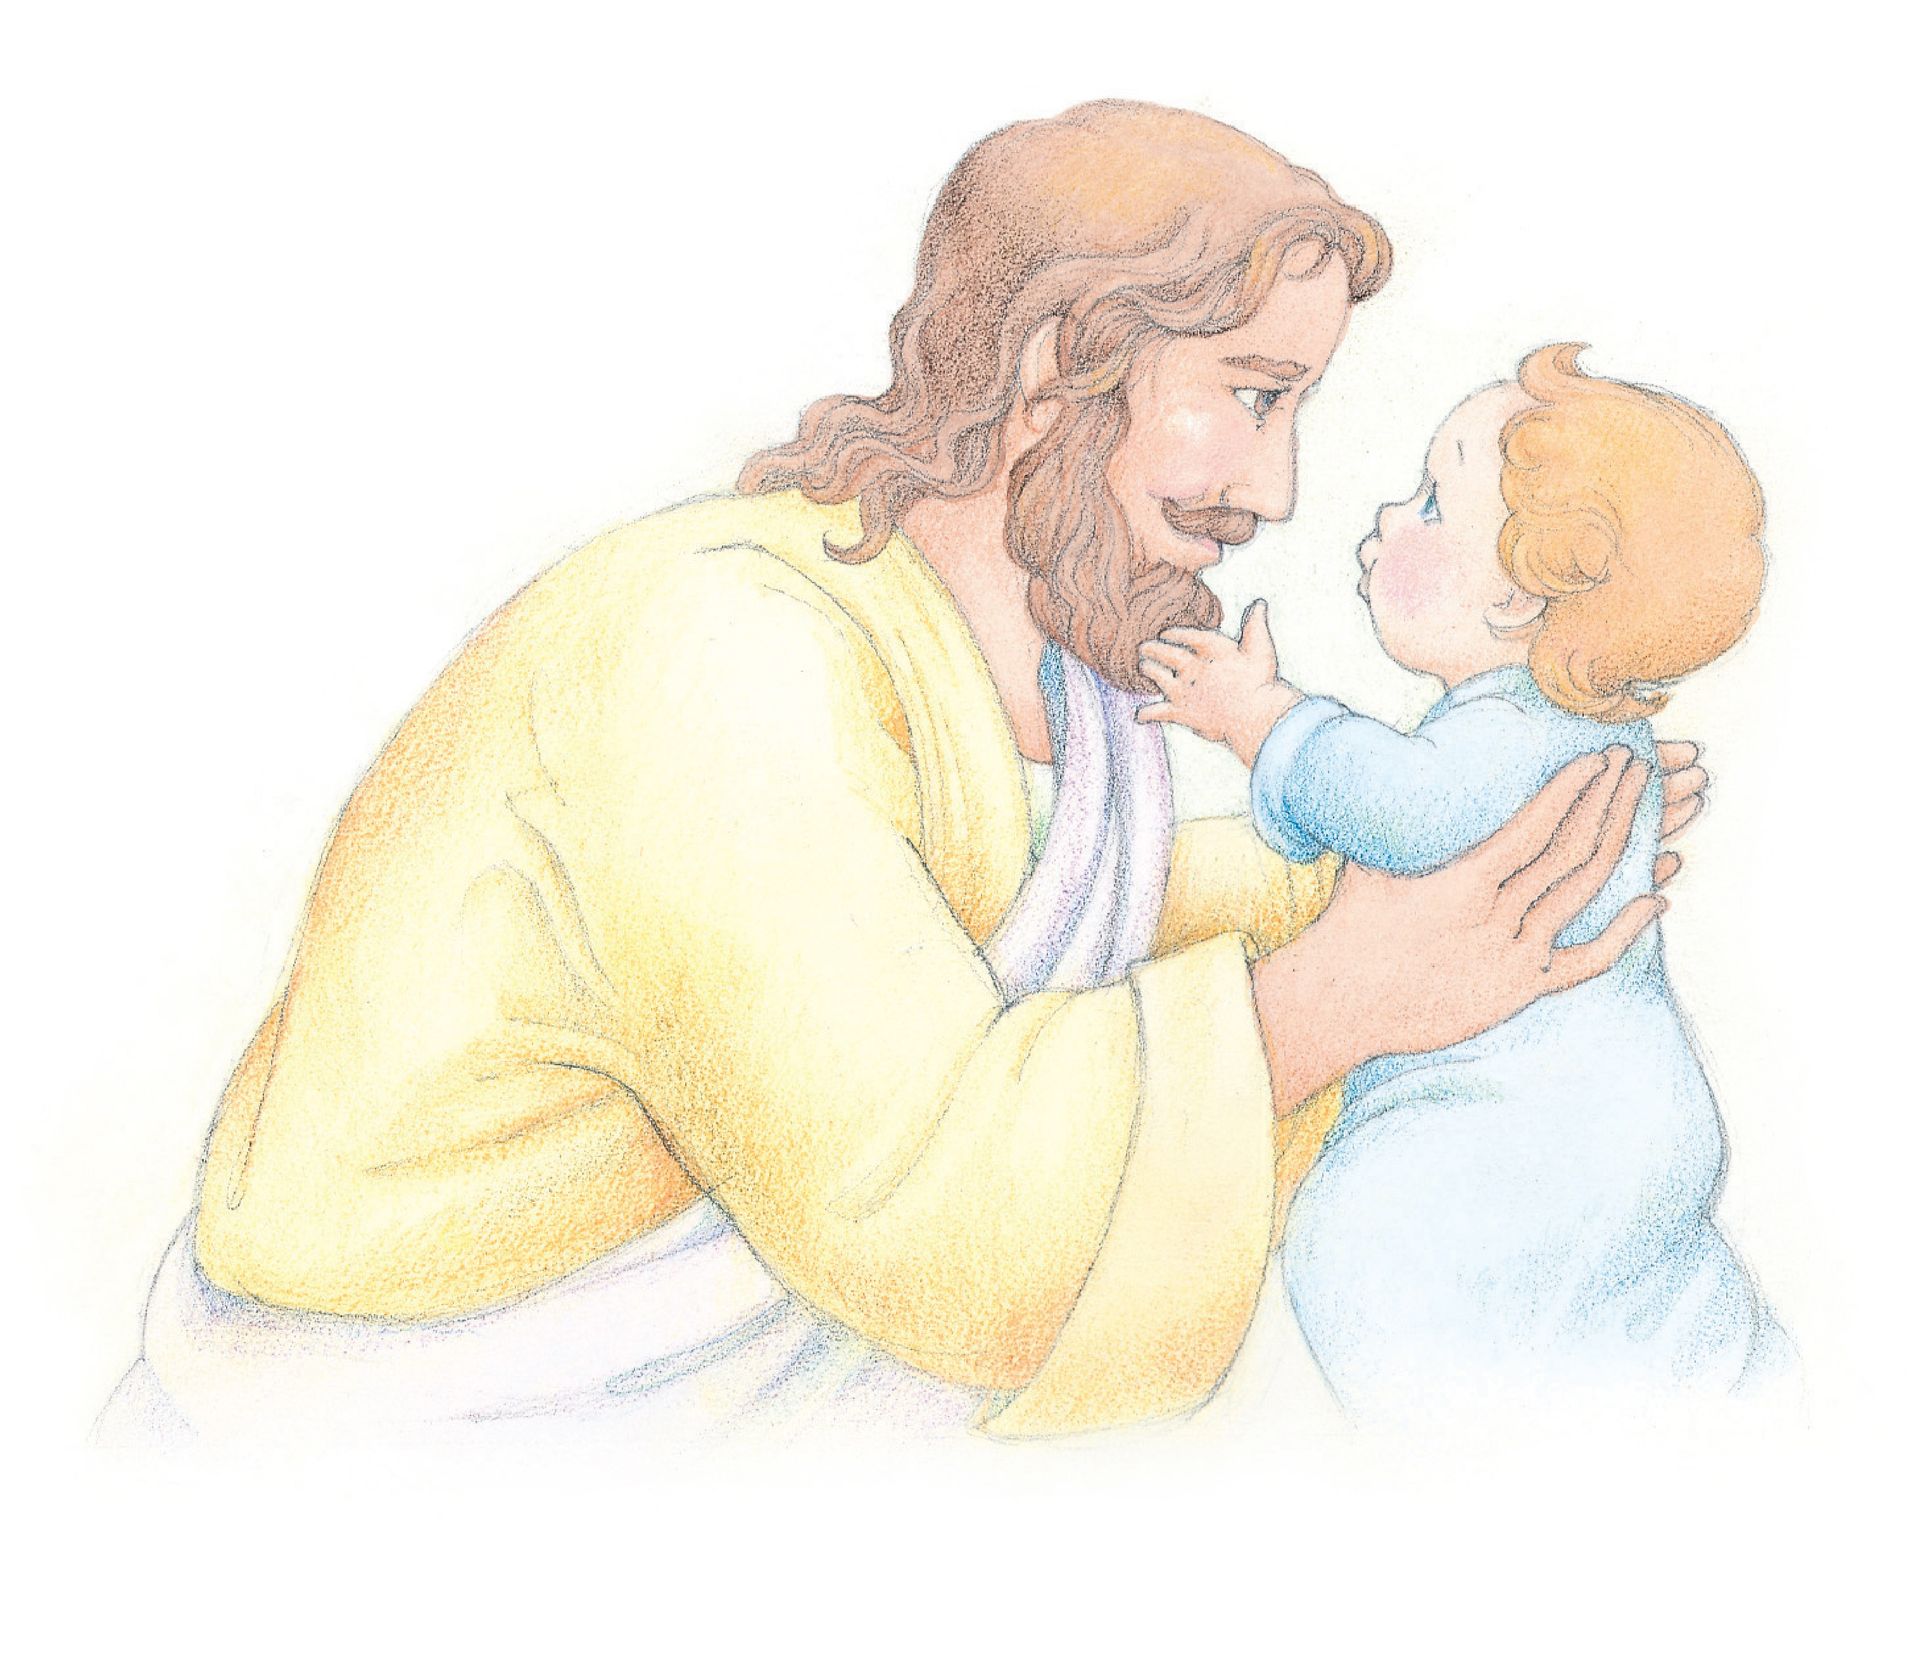 Jesus Christ holding a young child. From the Children’s Songbook, page 59, “Jesus Loved the Little Children”; watercolor illustration by Phyllis Luch.